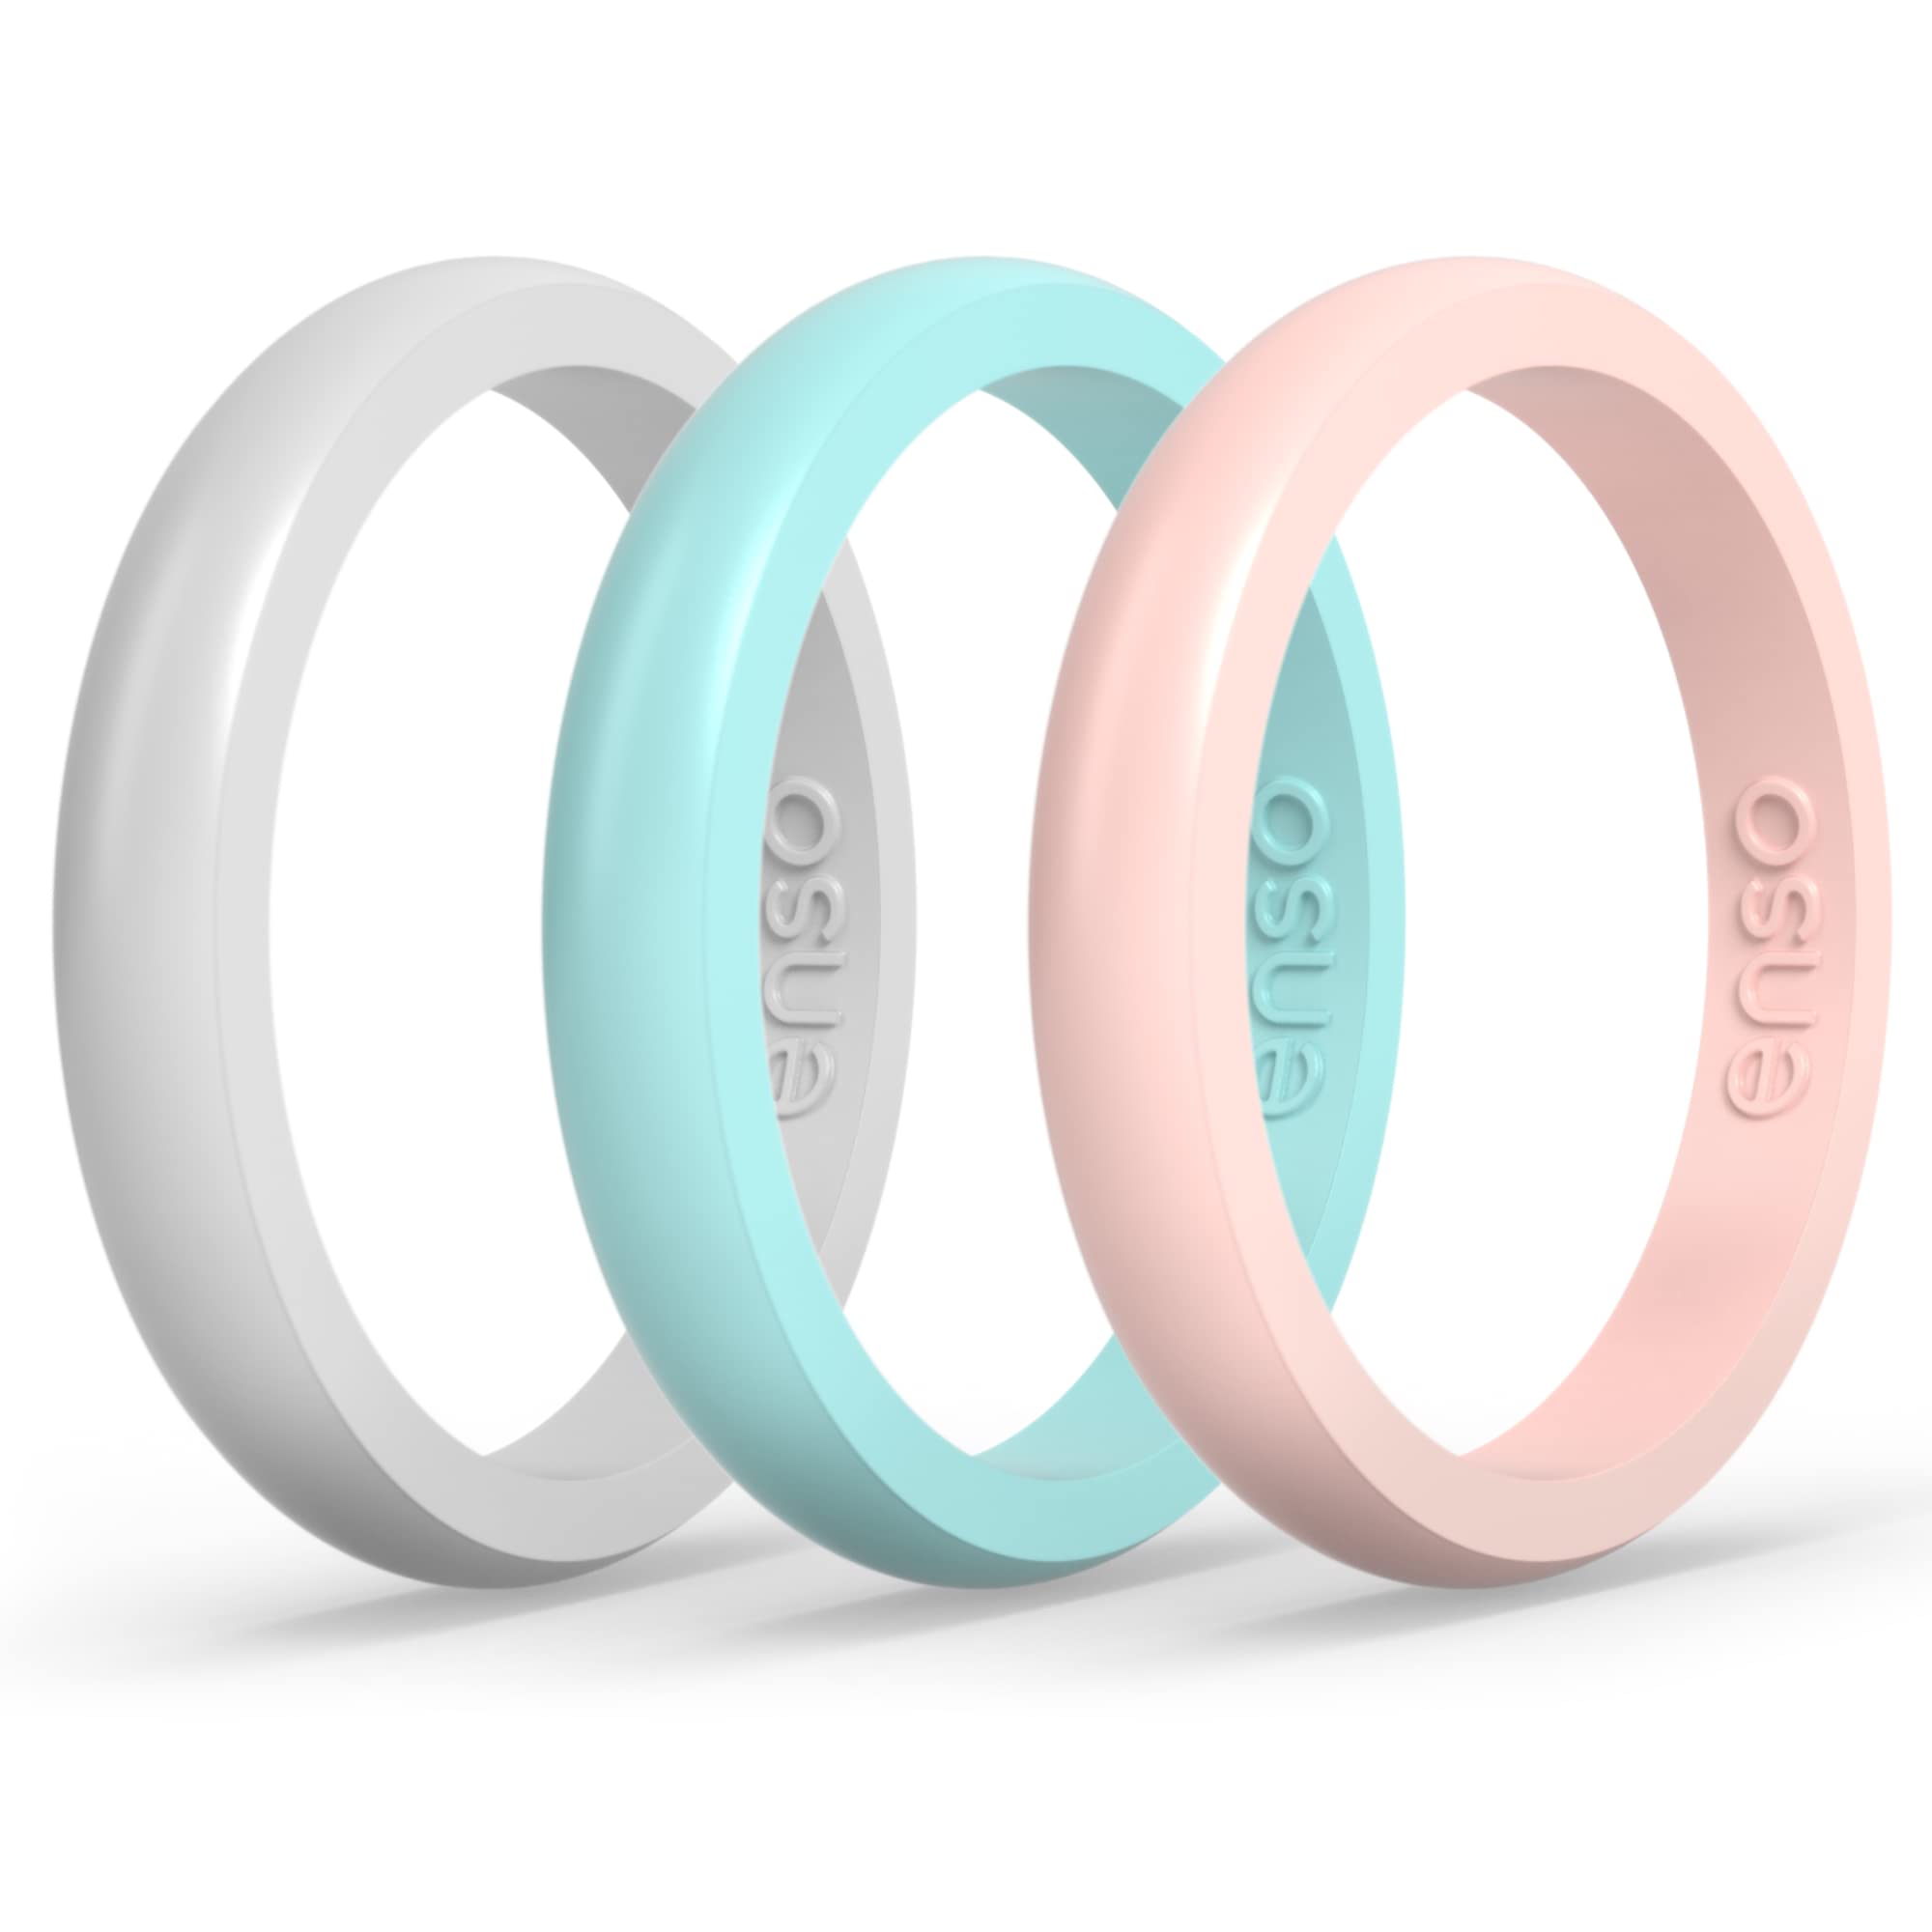 Enso Rings Classic Halo Toe Ring Set - Ultra Comfortable, Breathable, and Safe Silicone Toe Rings - Fits Most Toes - Pack of 3